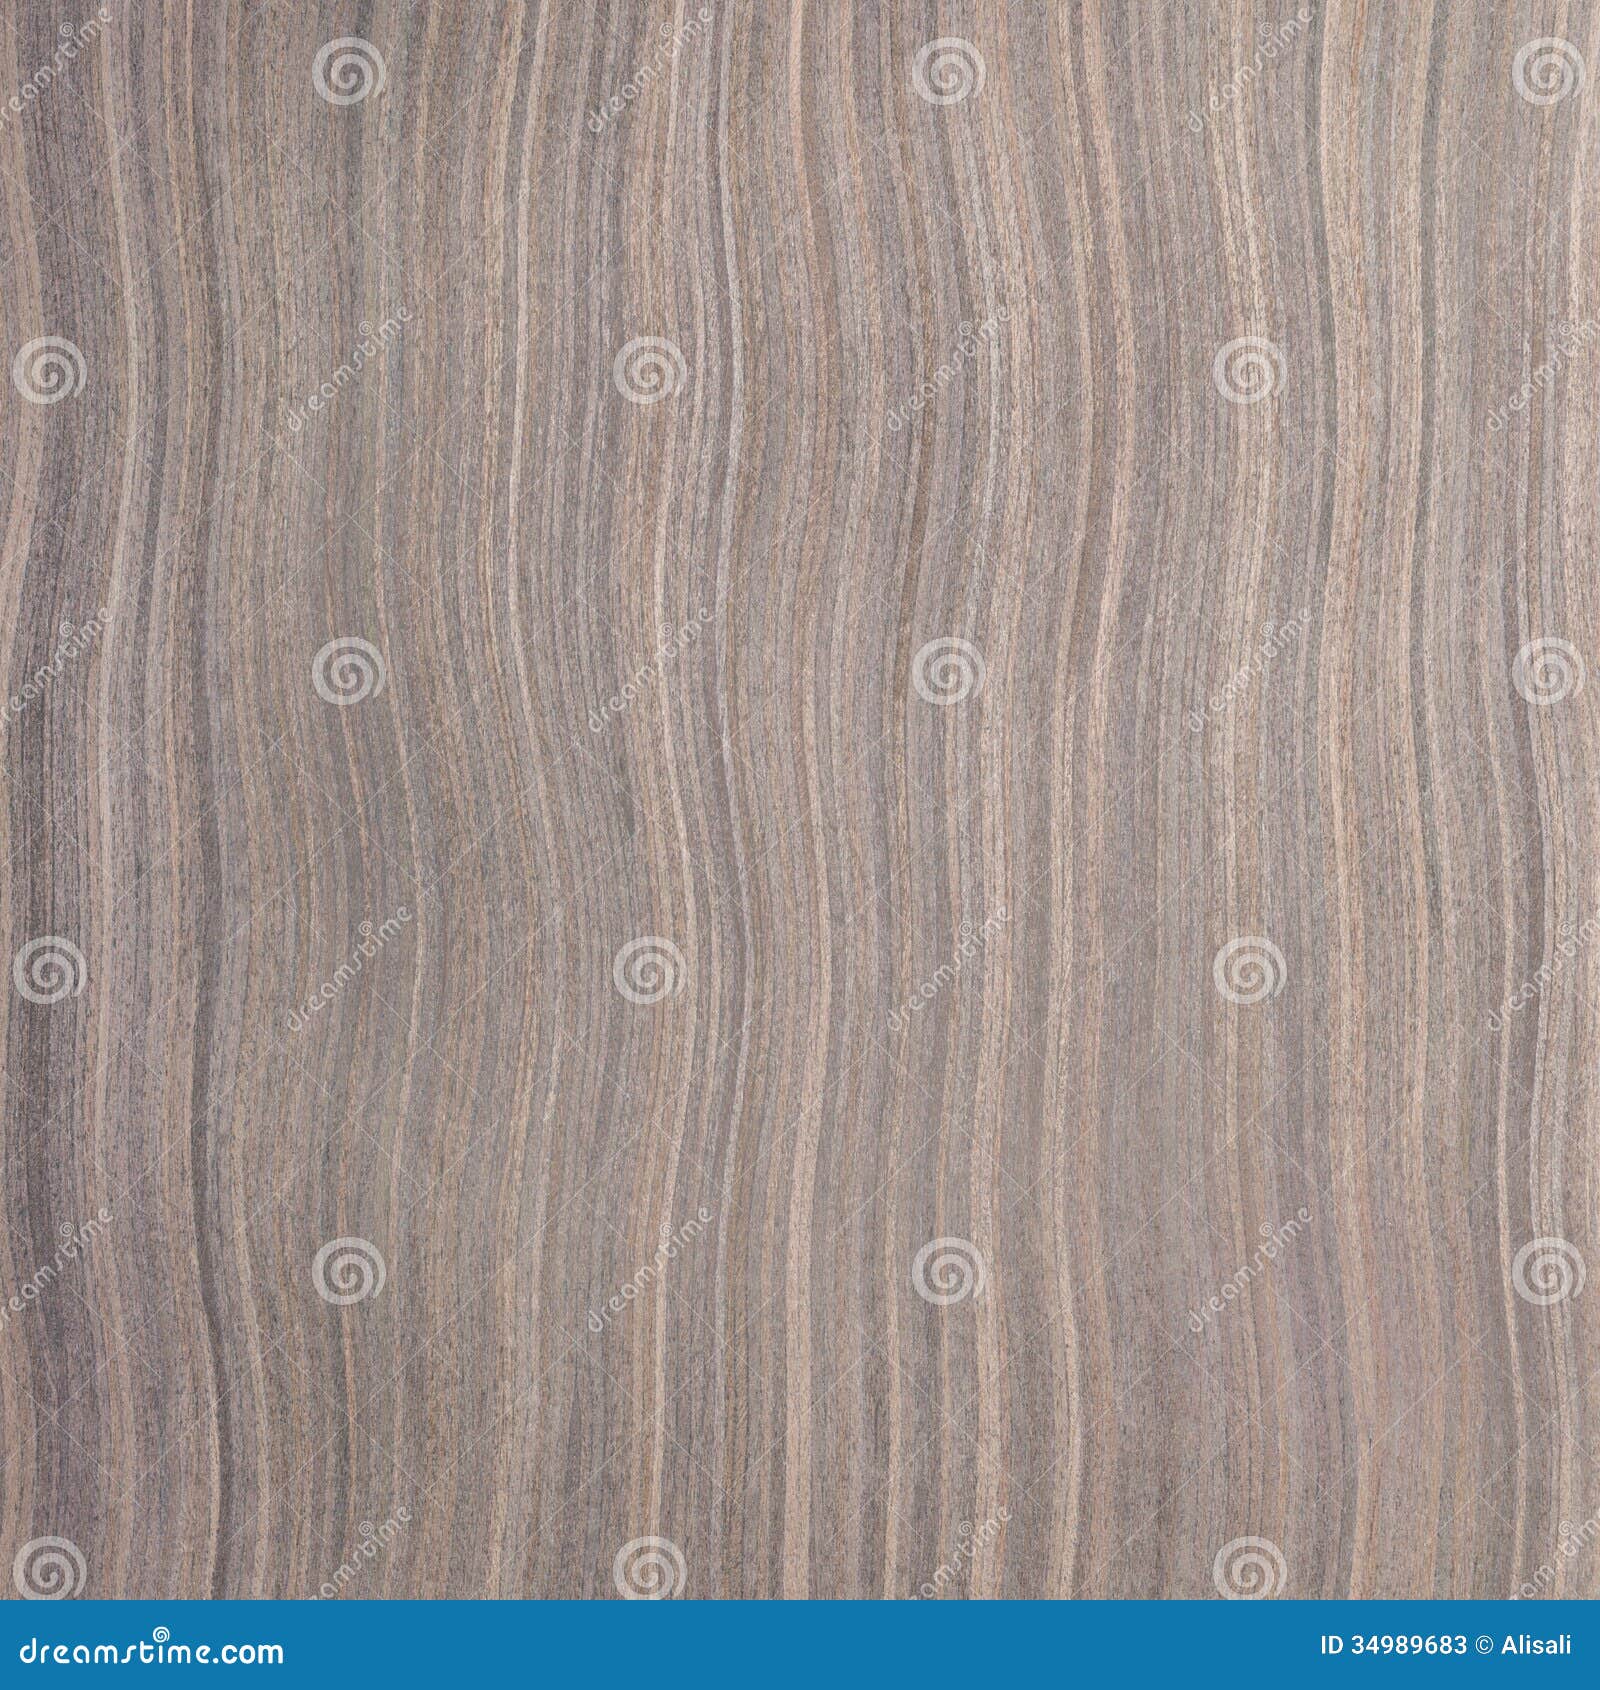 Wood Grain Texture. Ebony Wood Stock Photo, Picture and Royalty Free Image.  Image 11802746.